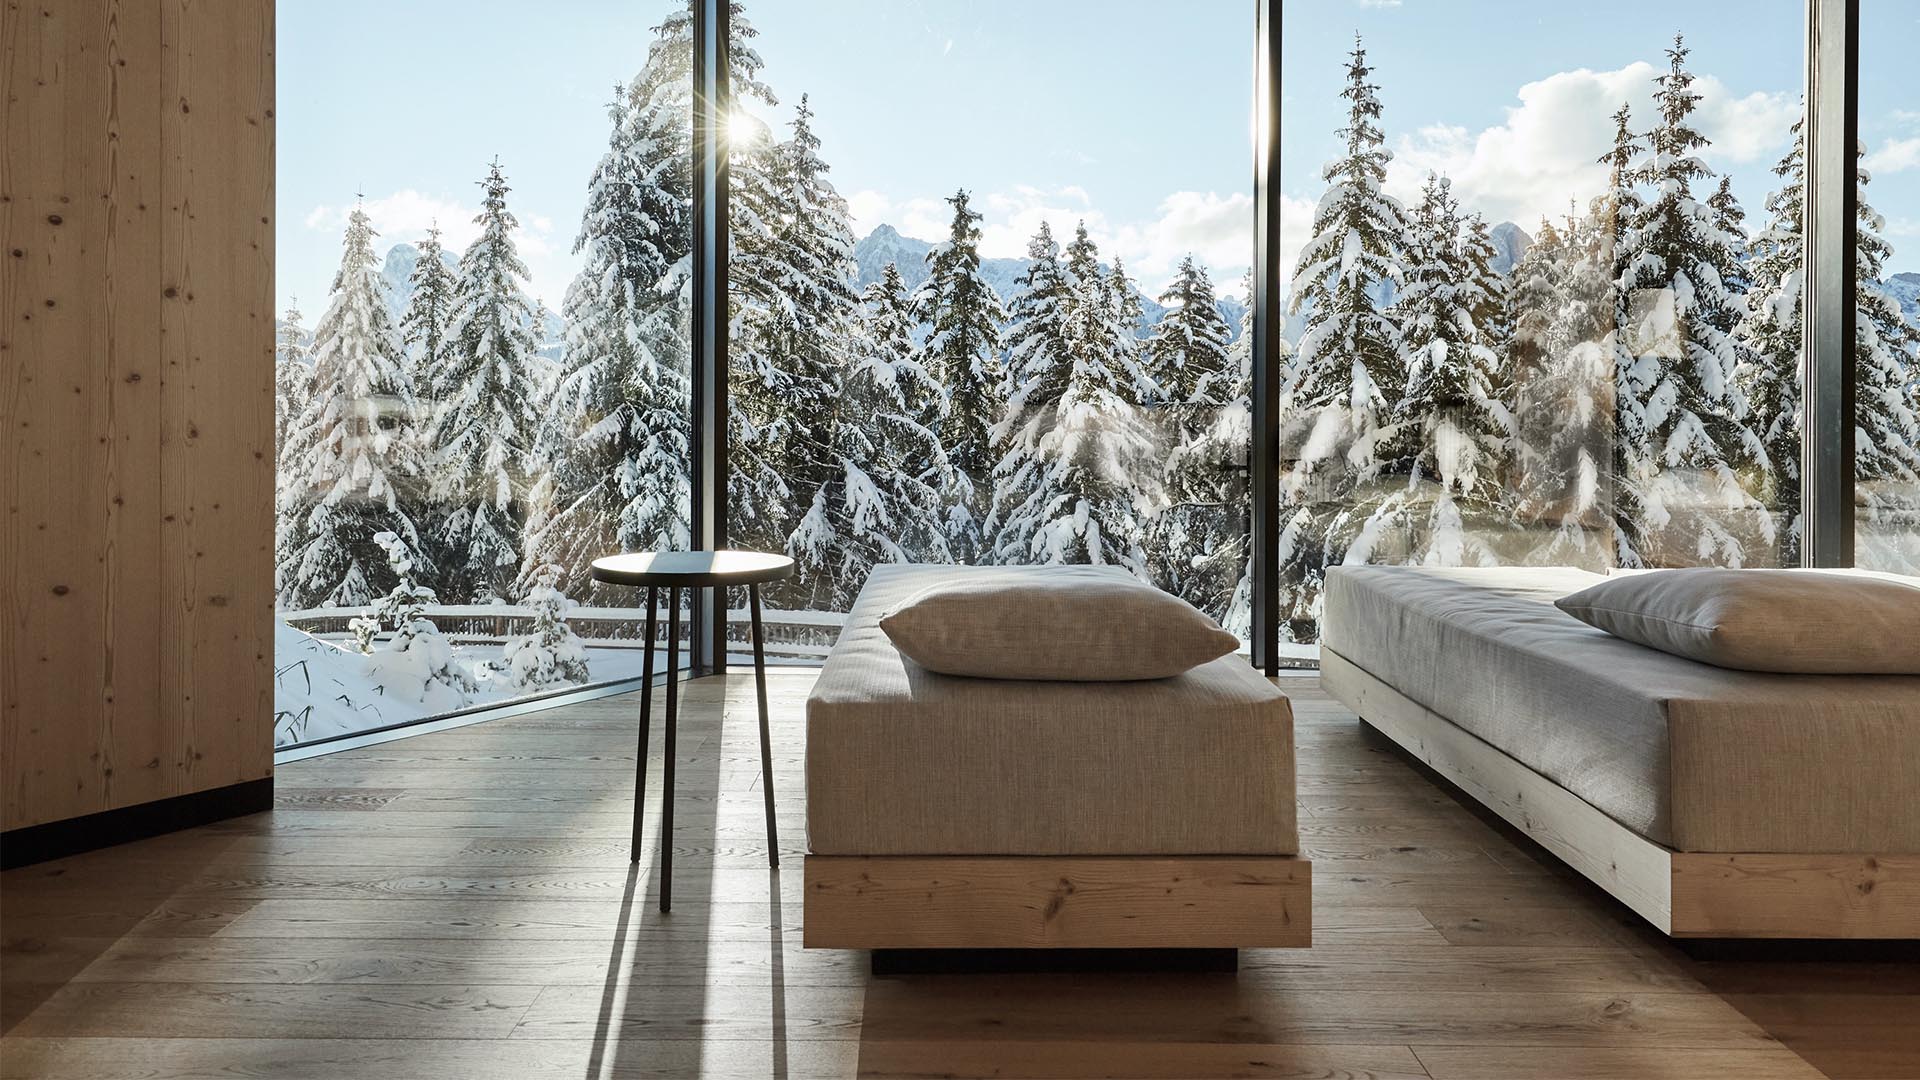 Winter wellness retreats: where to spa in the snow